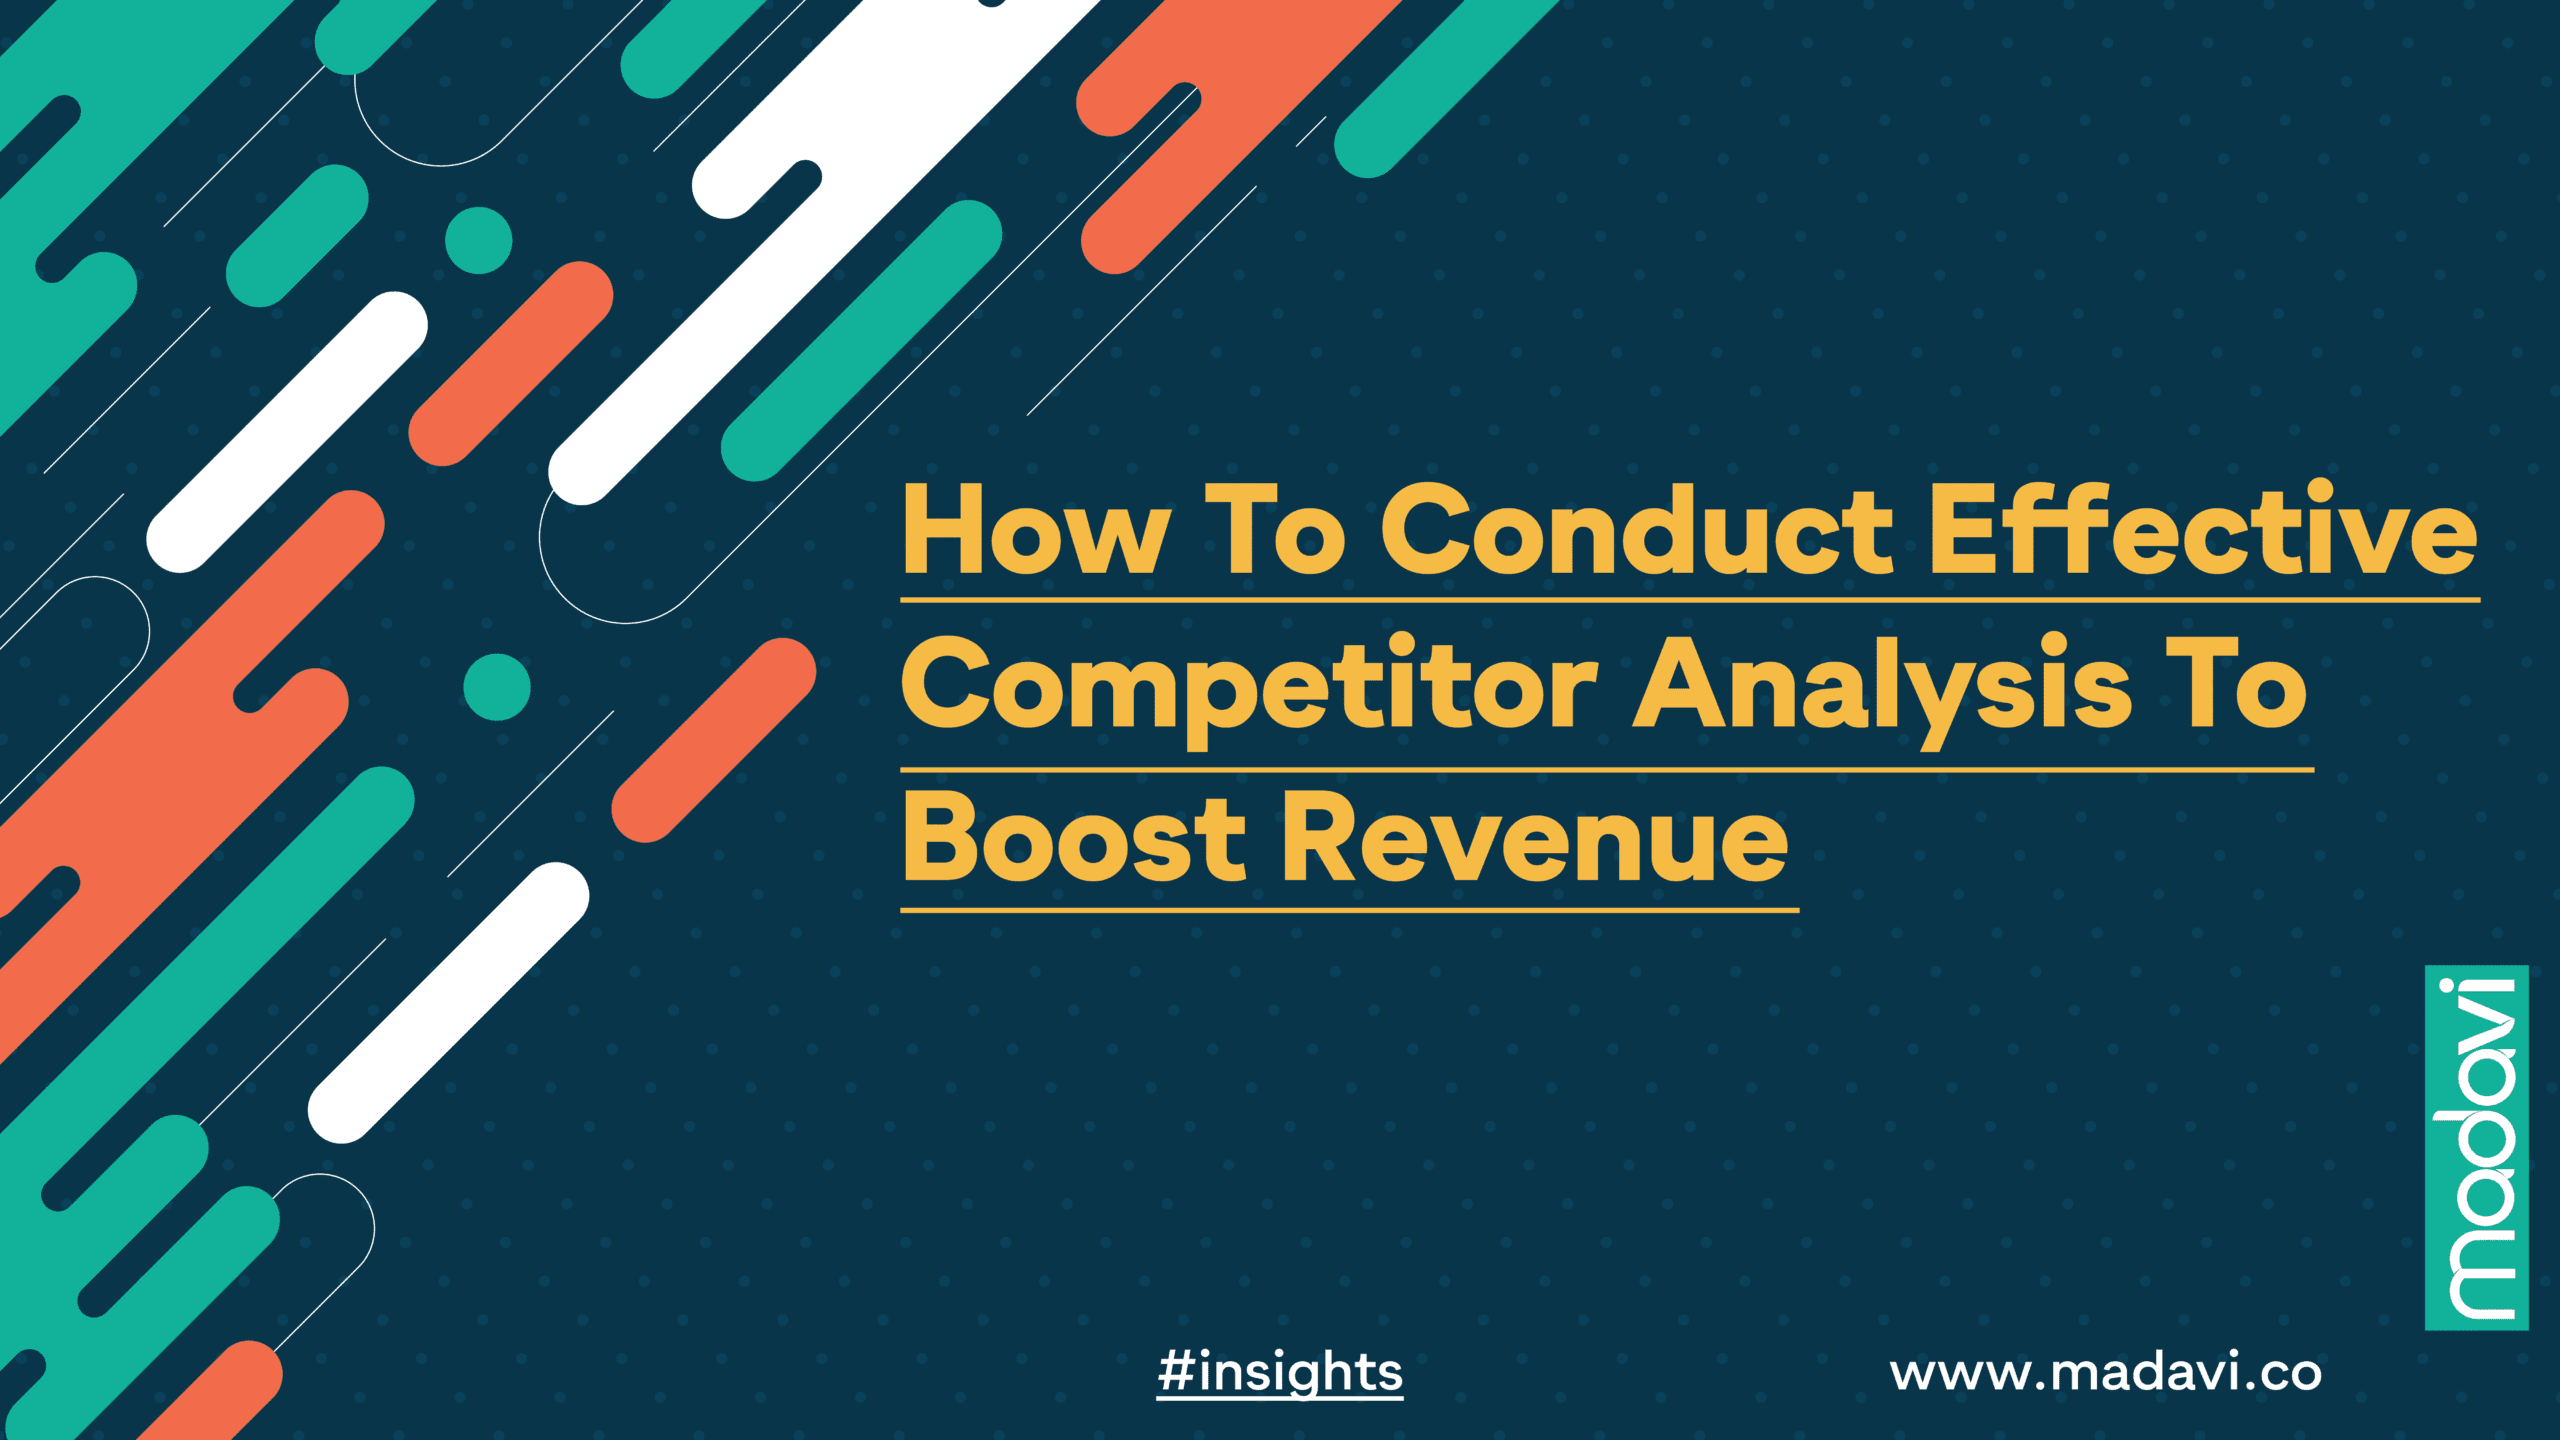 How To Conduct Effective Competitor Analysis To Boost Revenue 01 2